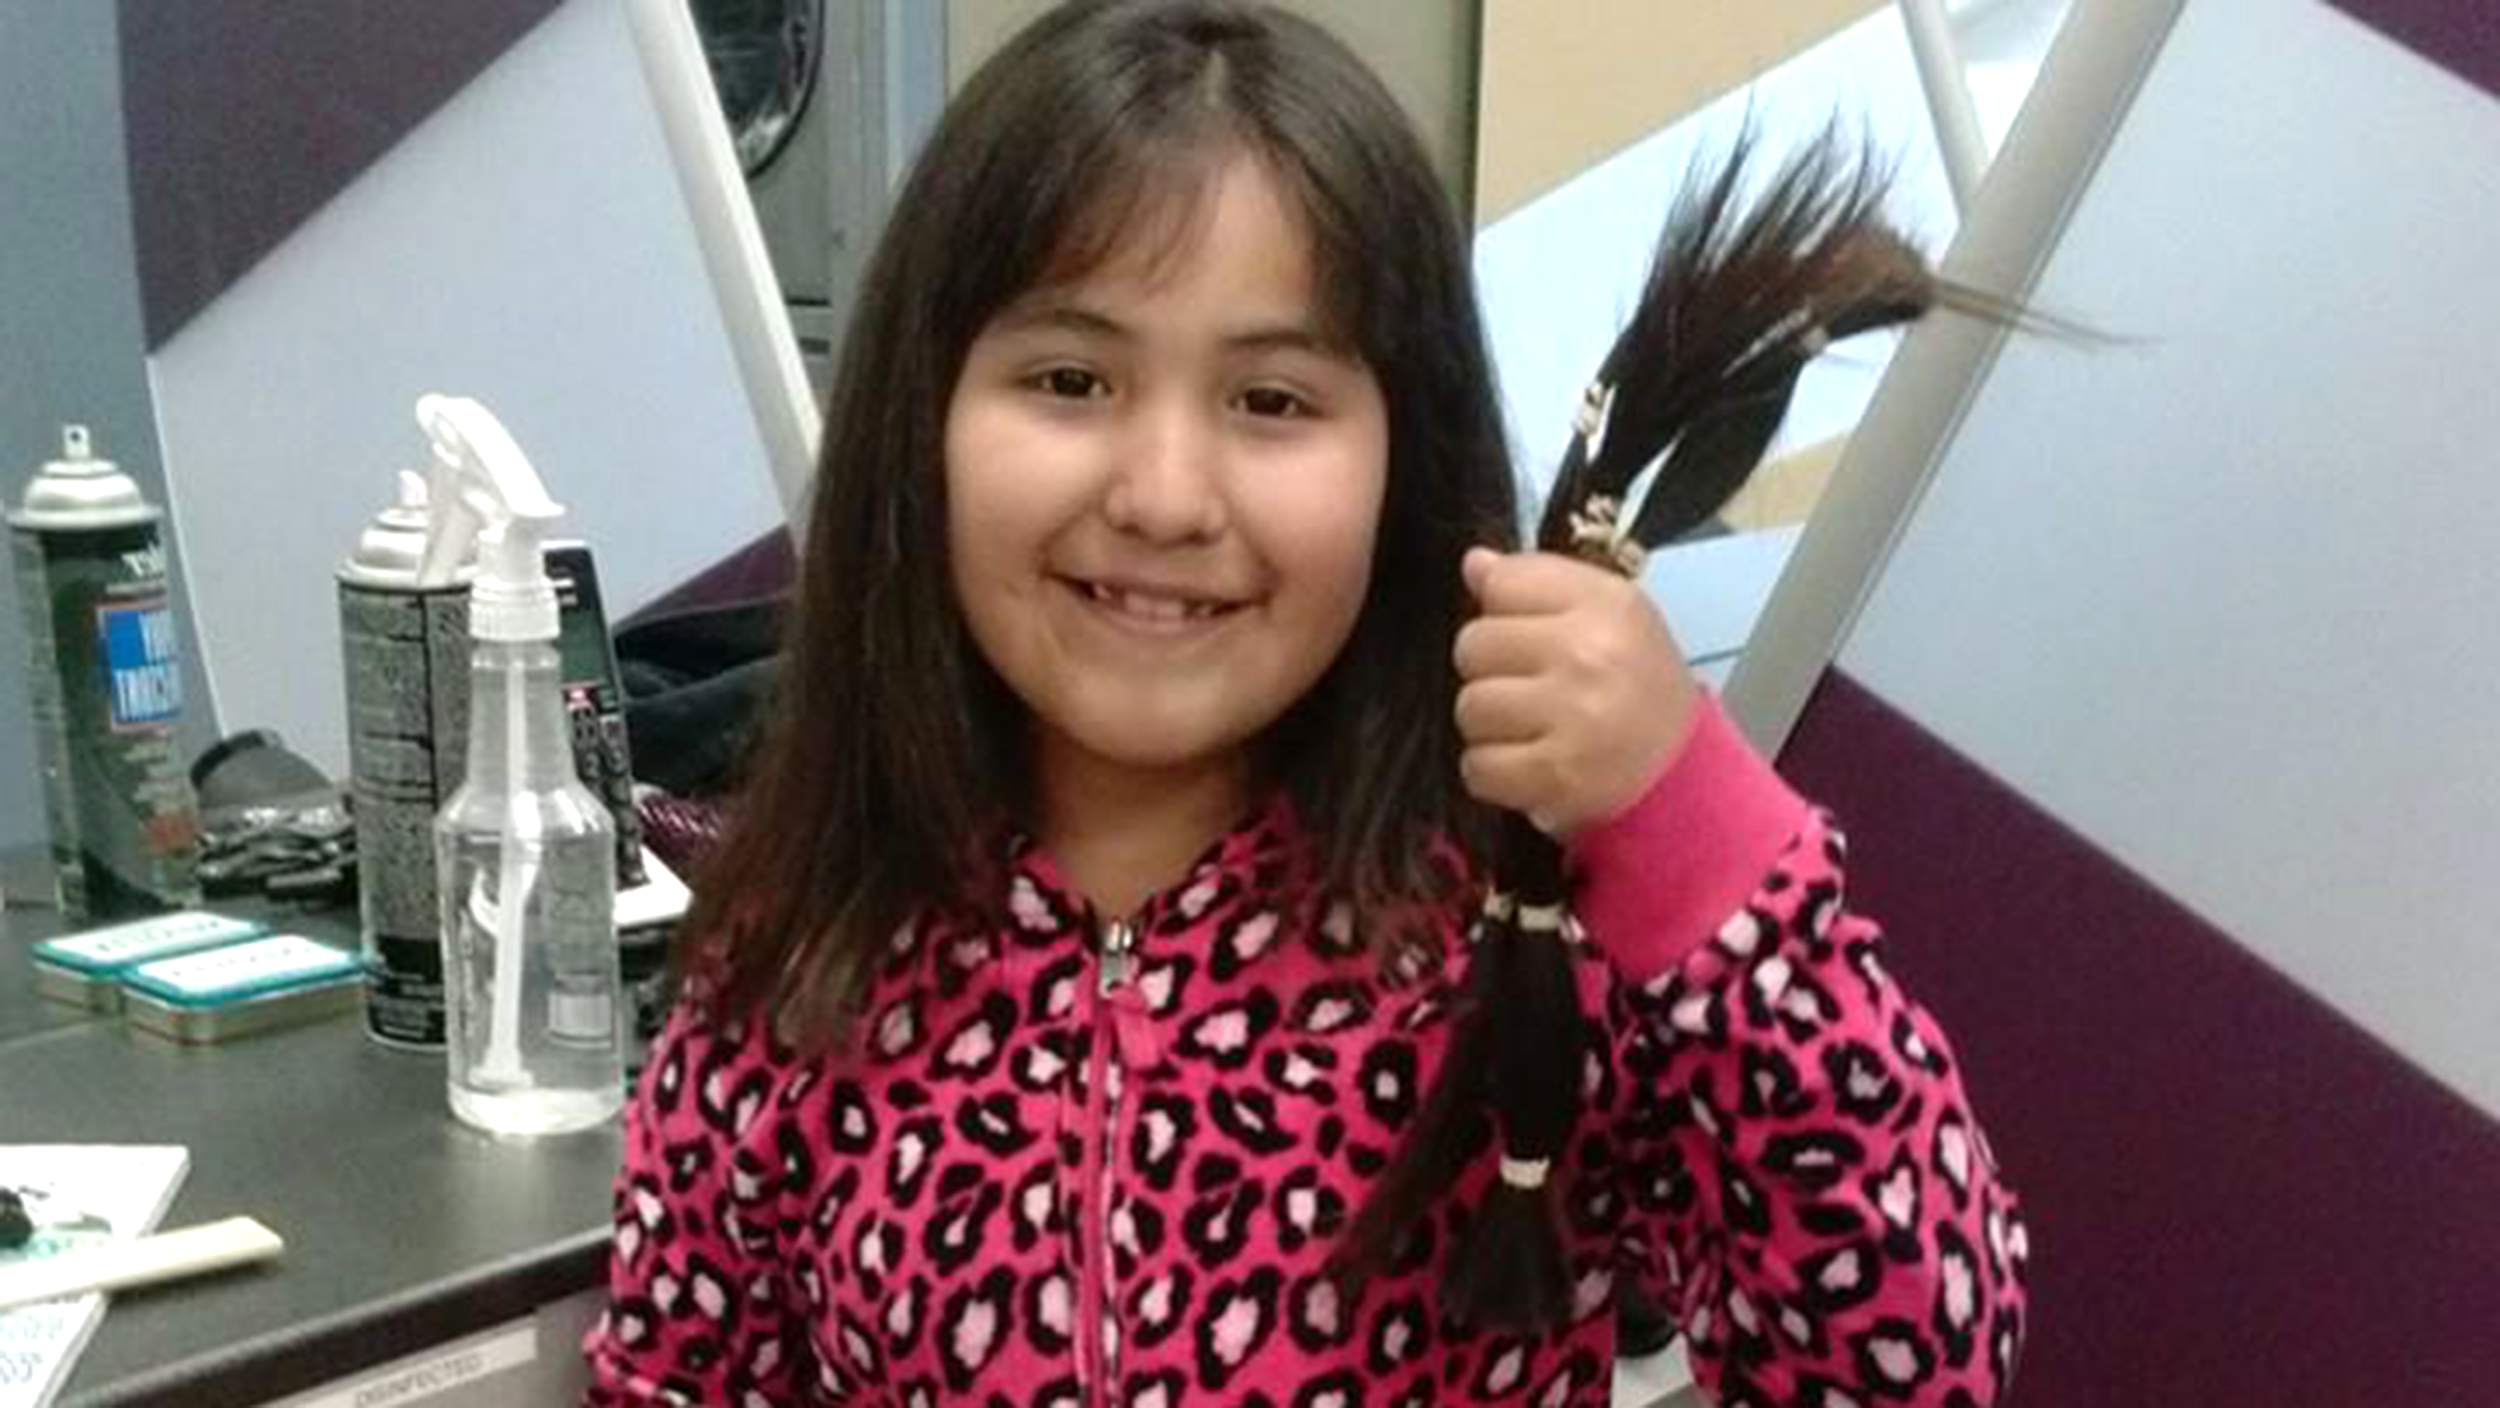 More 'real-life Rapunzels': These children chopped their hair to help other  sick kids